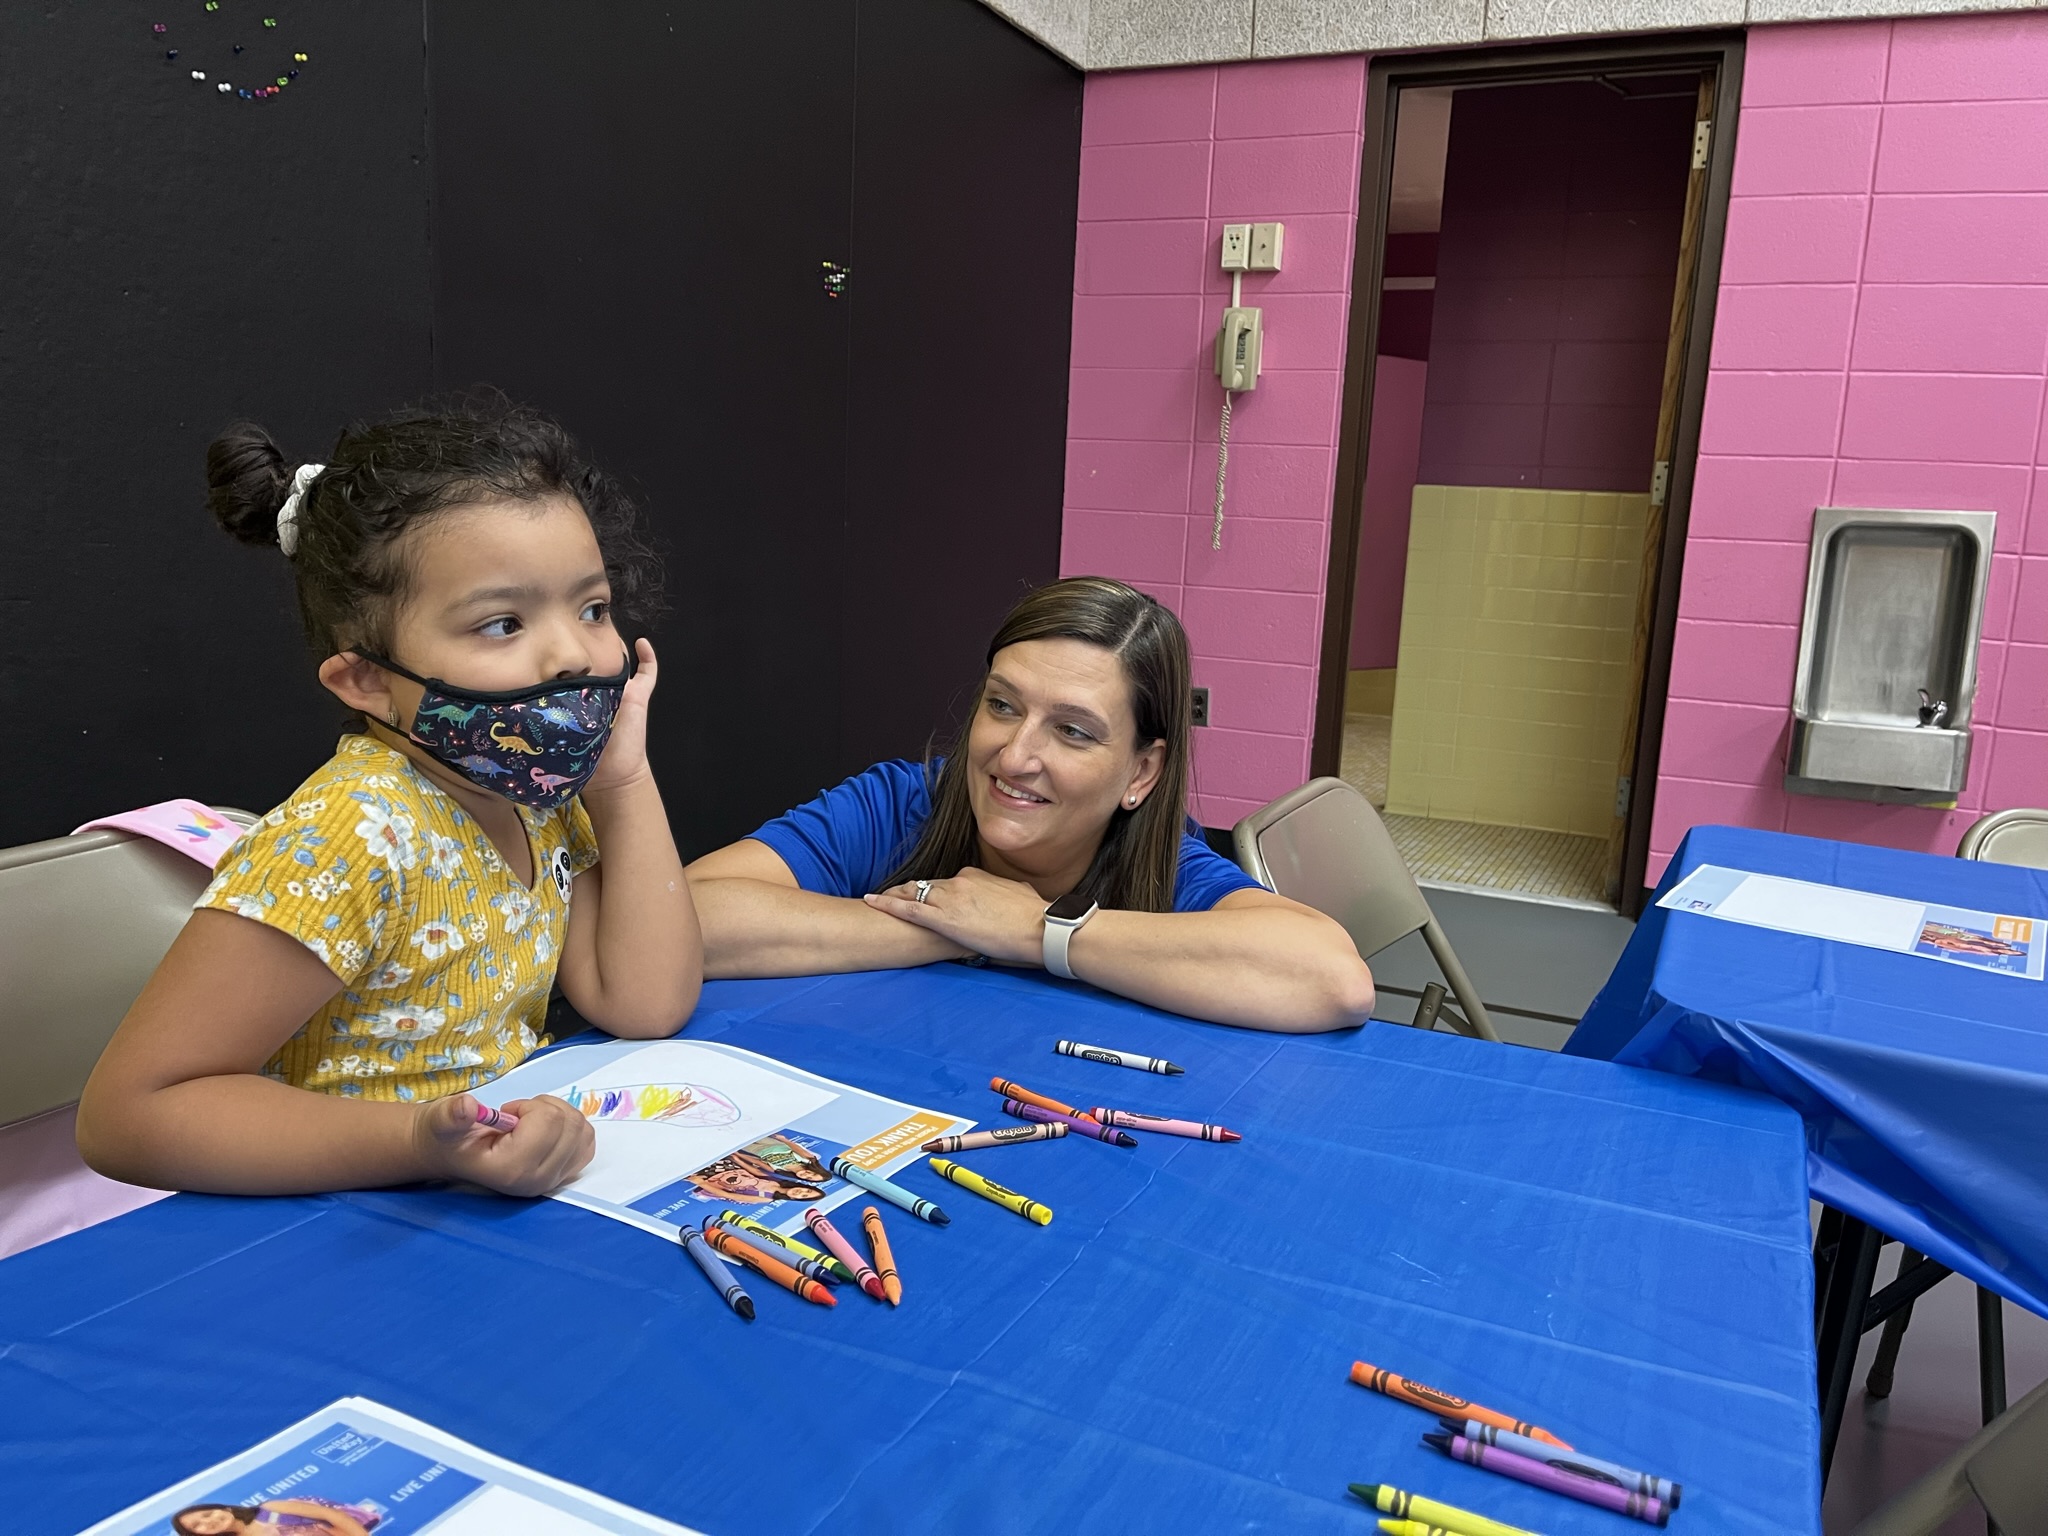 United Way of Western Connecticut's Back-to-School Program 2022